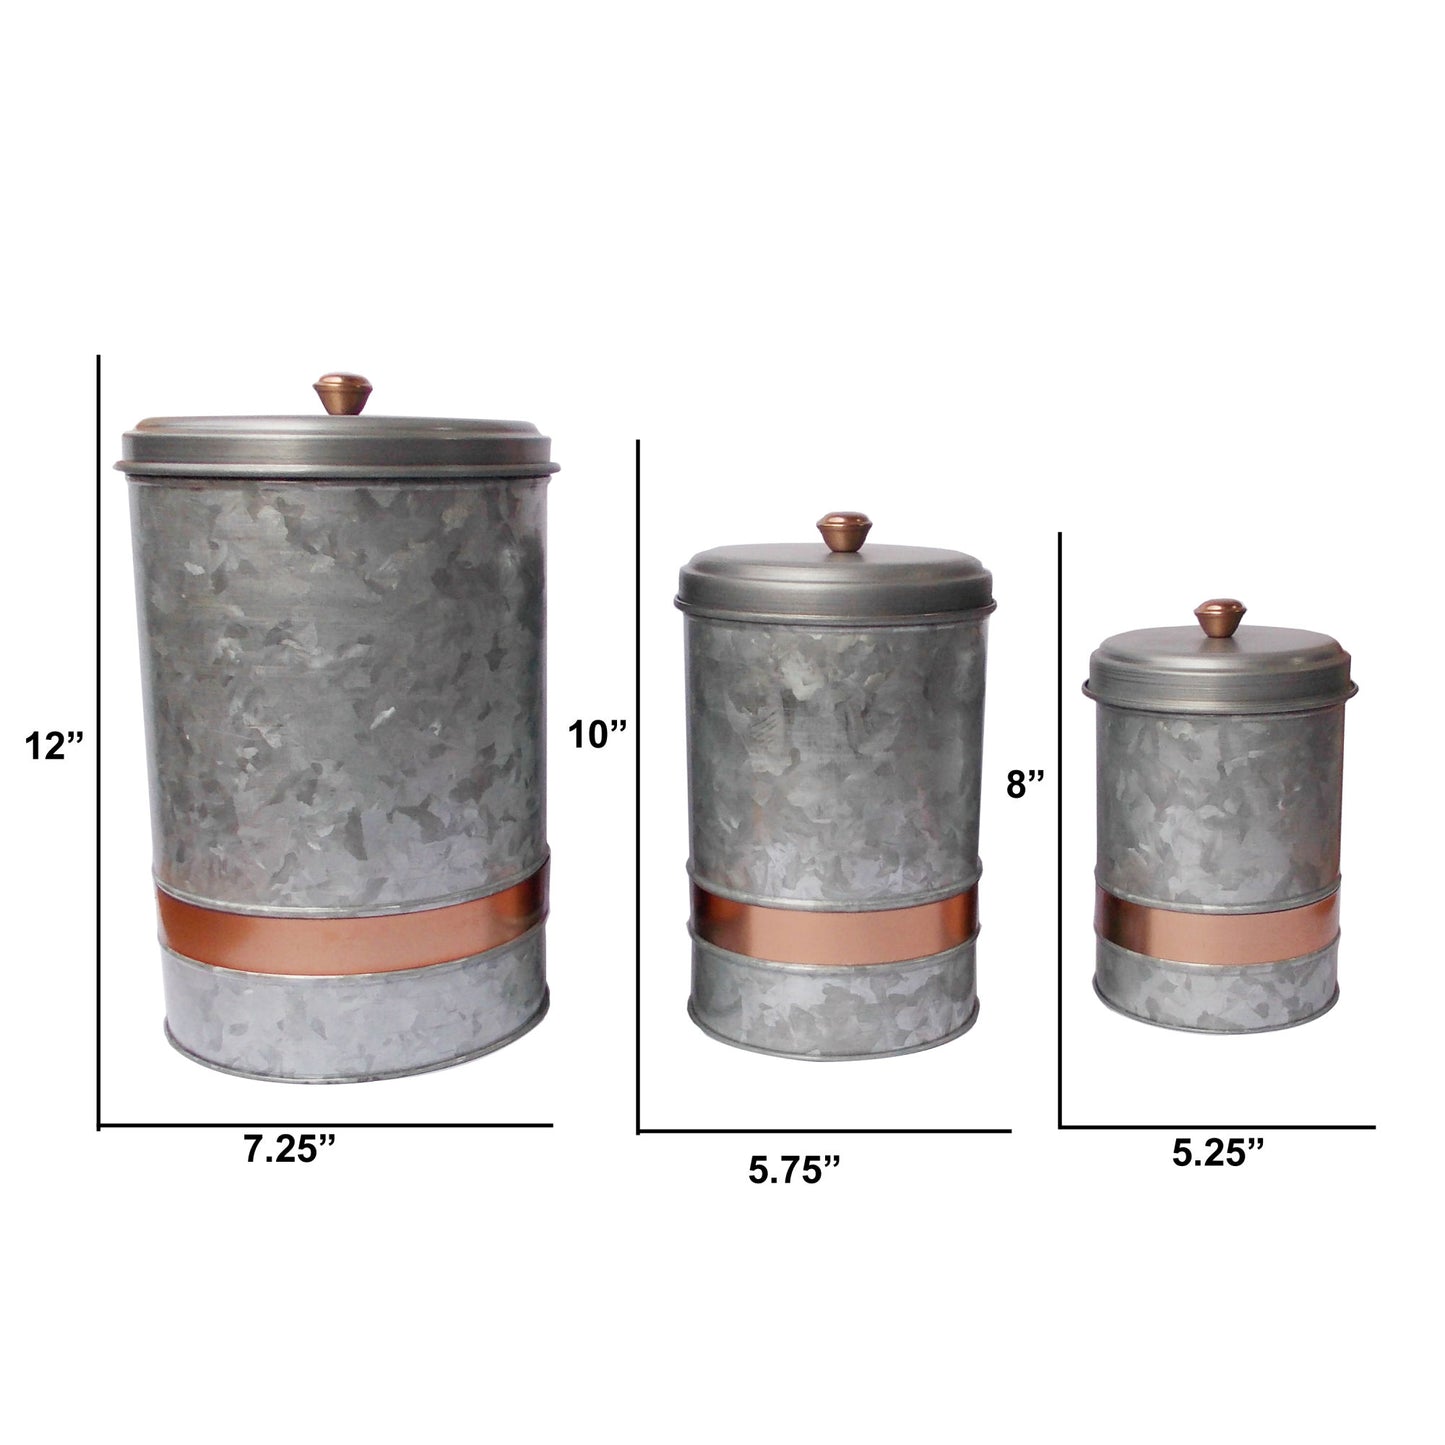 Galvanized Metal Lidded Canister With Copper Band, Set of Three, Gray